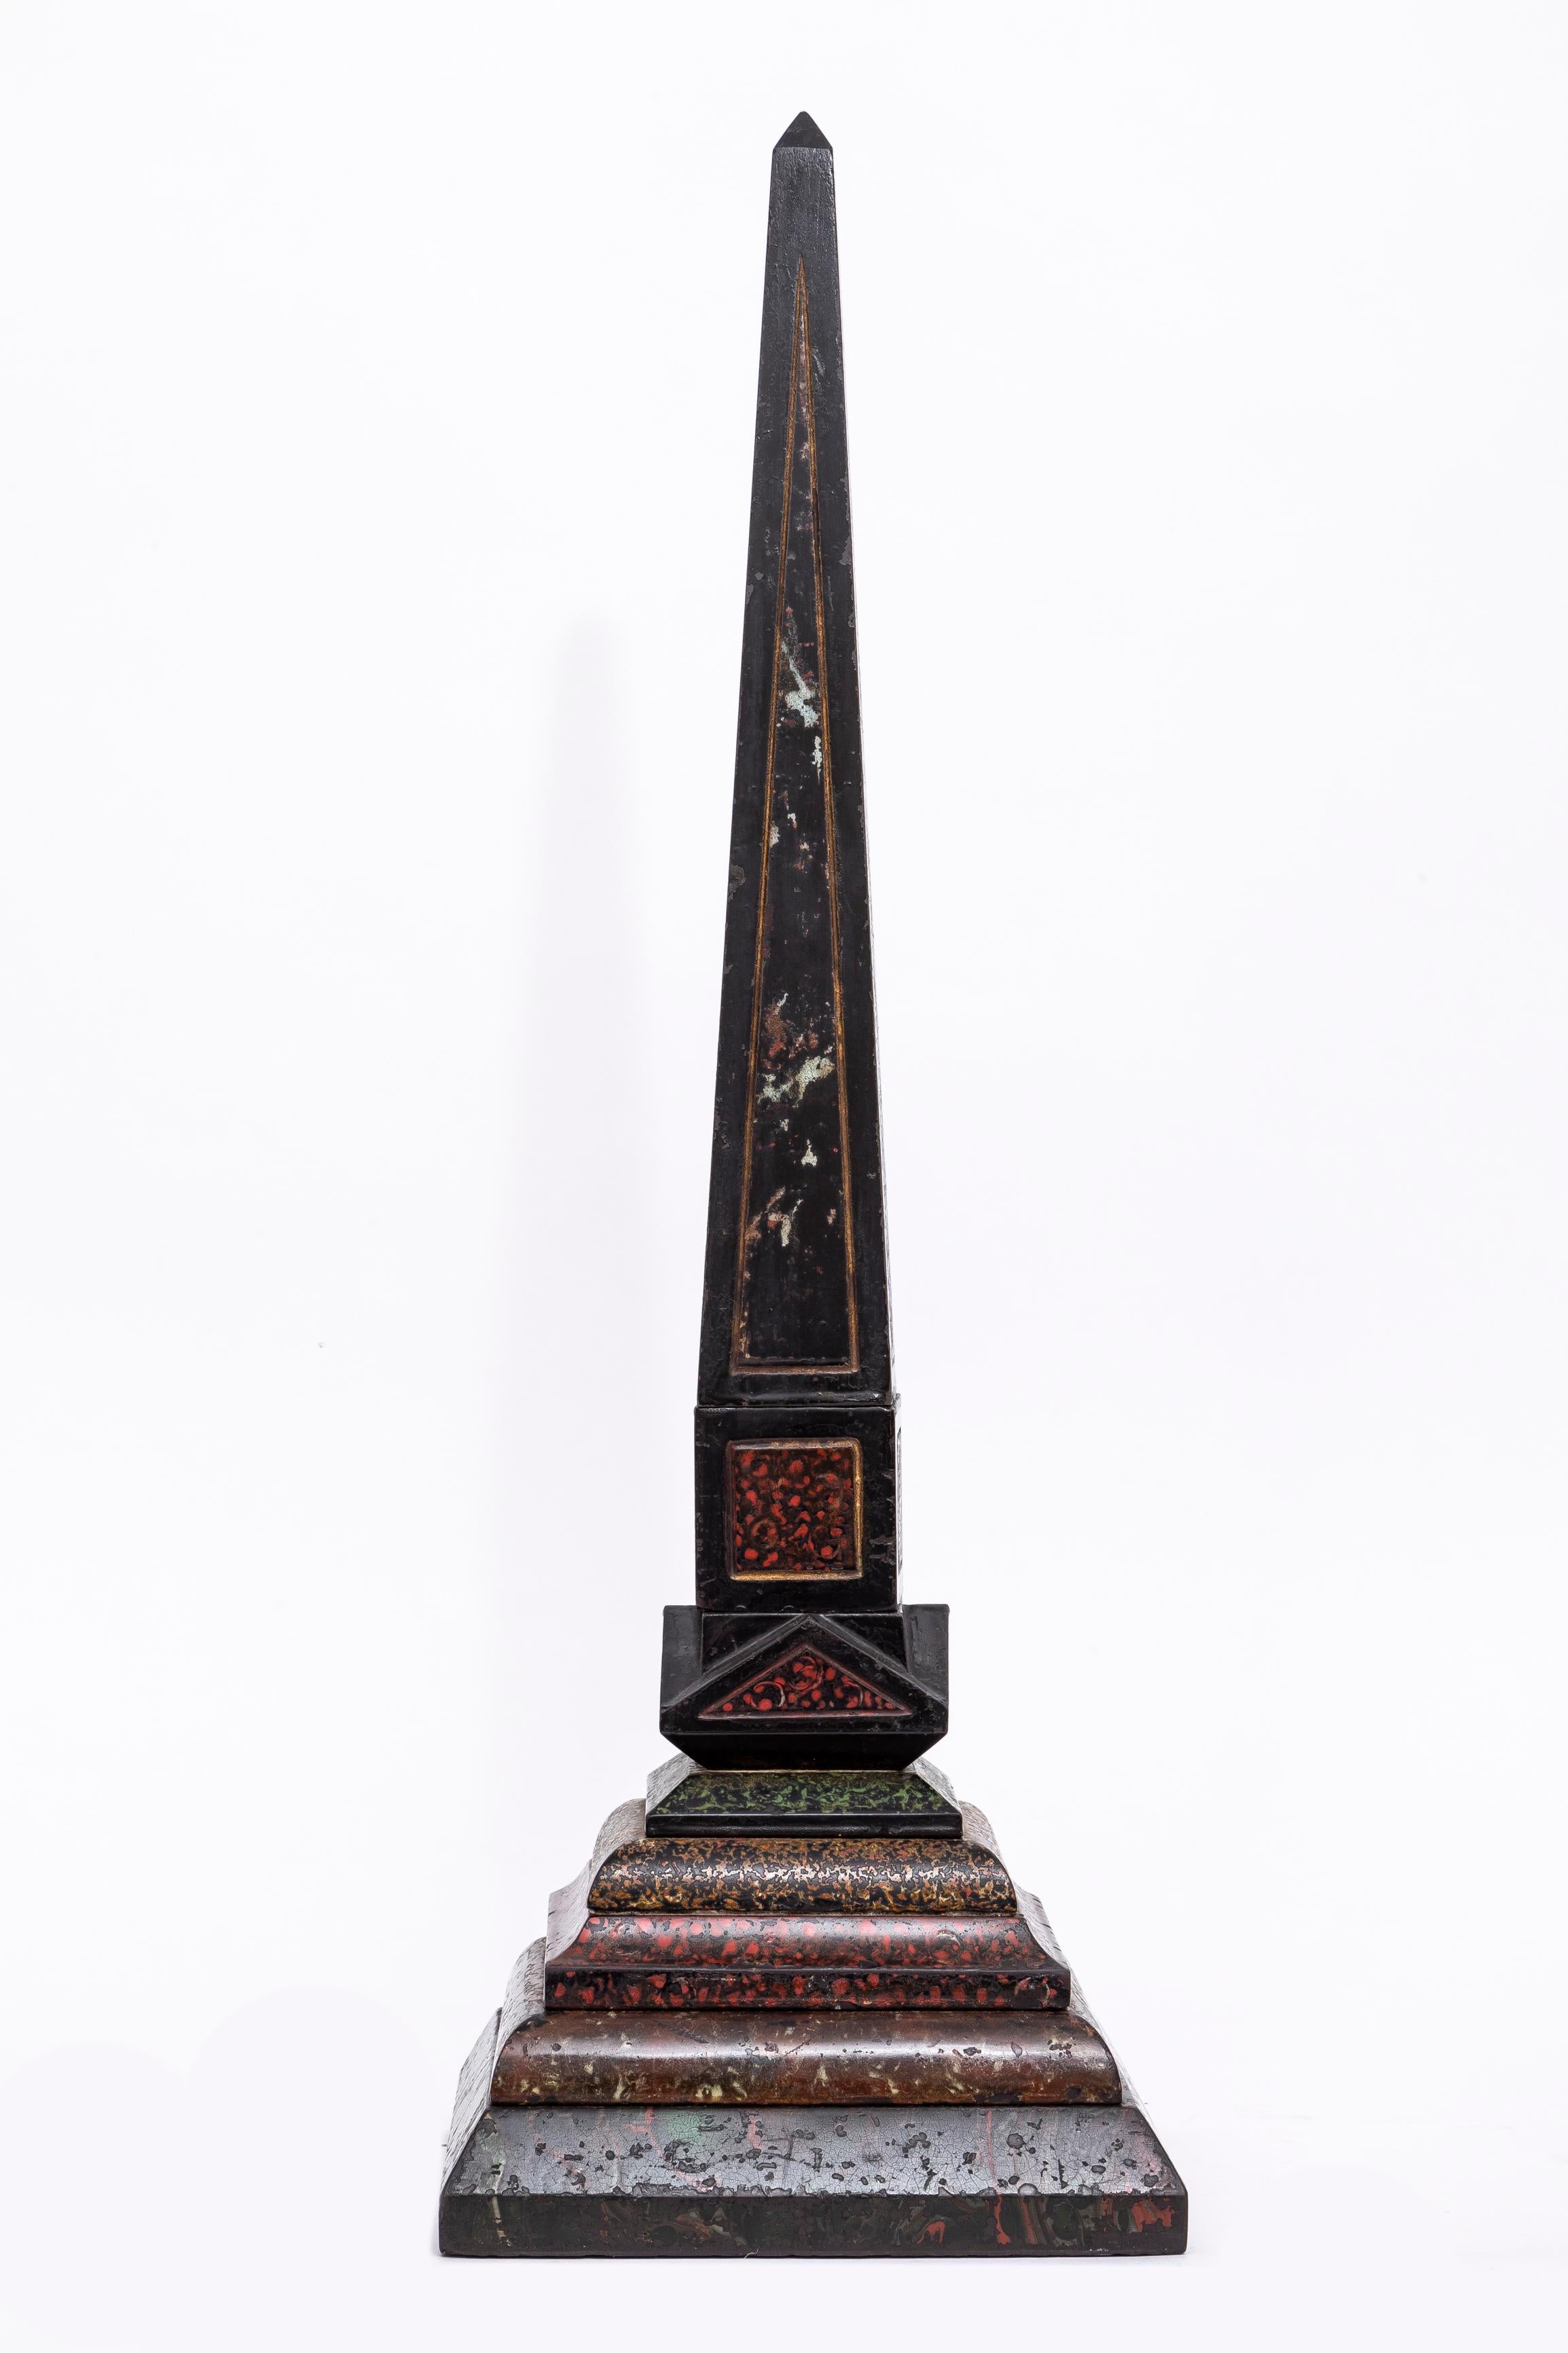 A Fantastic 18th/19th Century Italian Grand Tour Antique Mixed Marble and Scagliola Obelisk. This grand tour Italian mixed marble and scagliola obelisk mixes Egyptian architecture into traditional European homeware. Made during the late 1700s, the